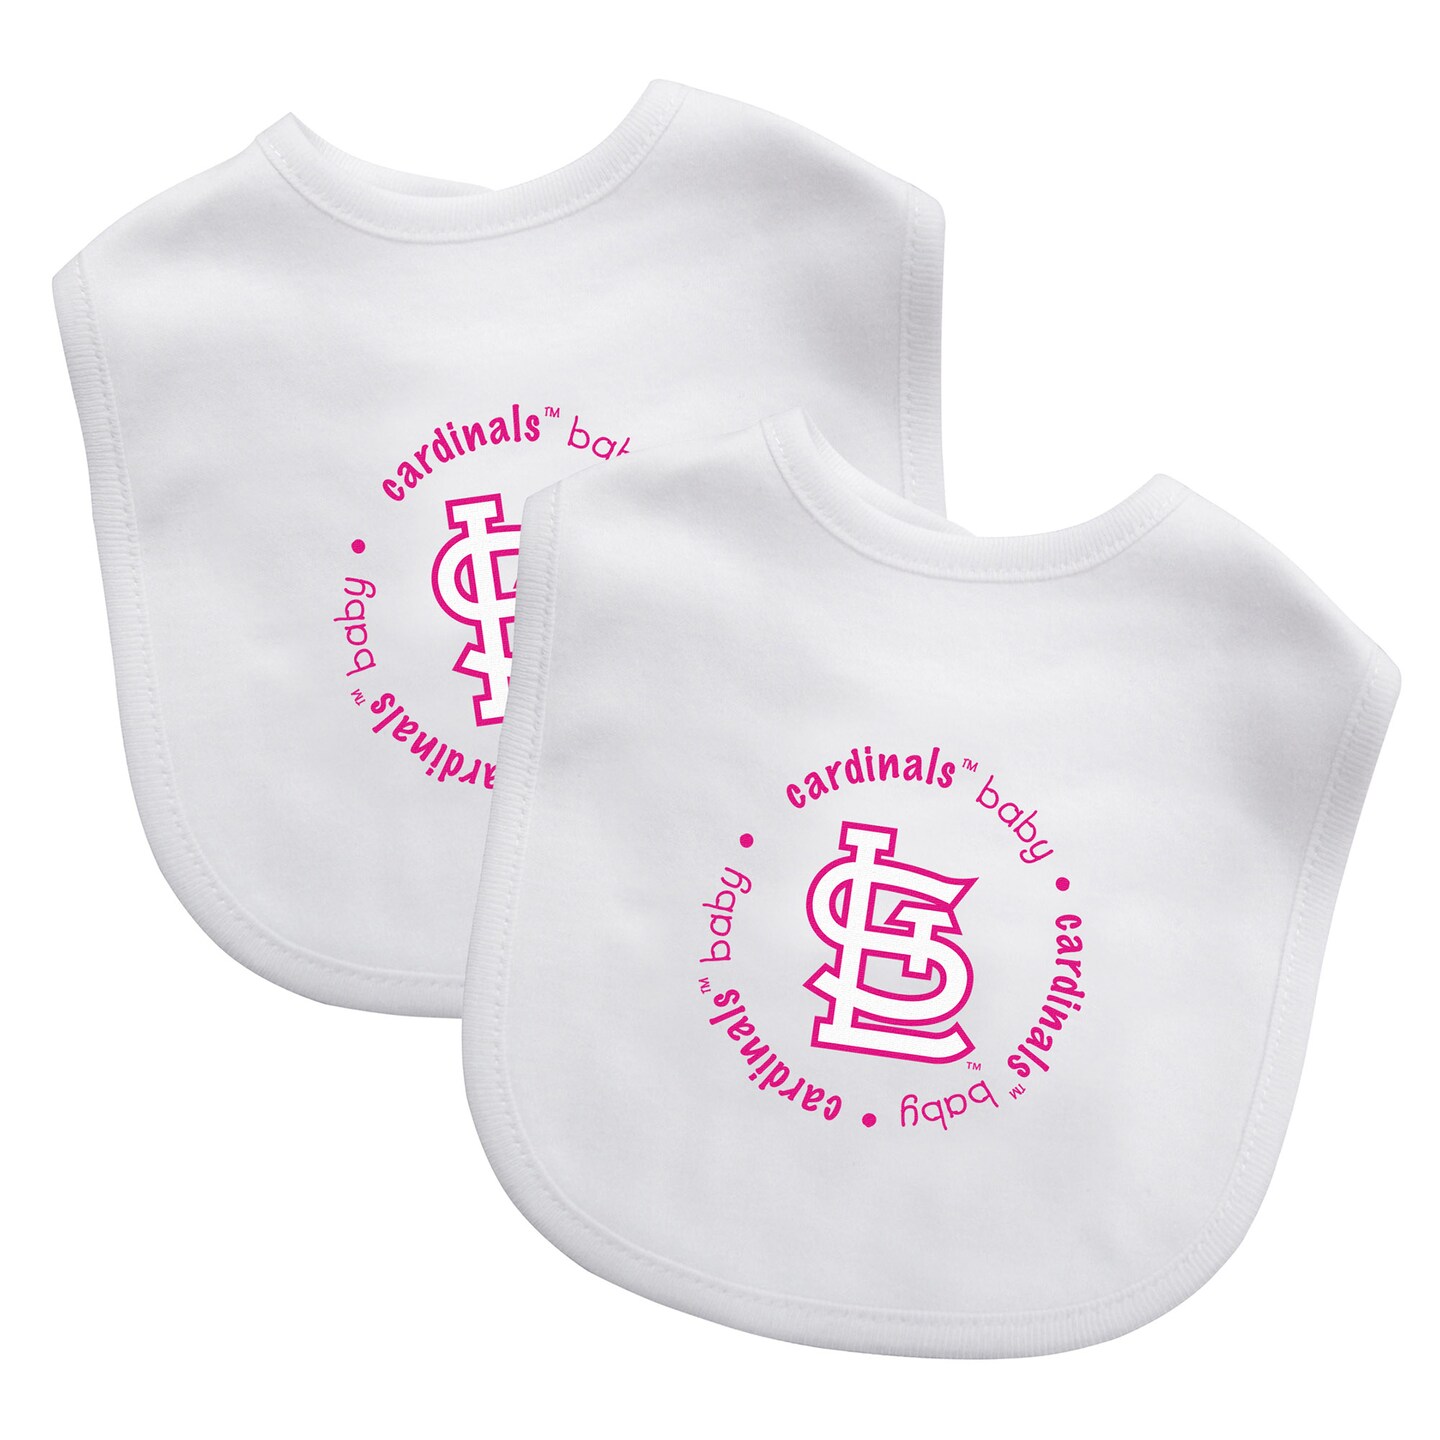 Baby Fanatic Officially Licensed Unisex Baby Bibs 2 Pack - MLB St. Louis  Cardinals Baby Apparel Set